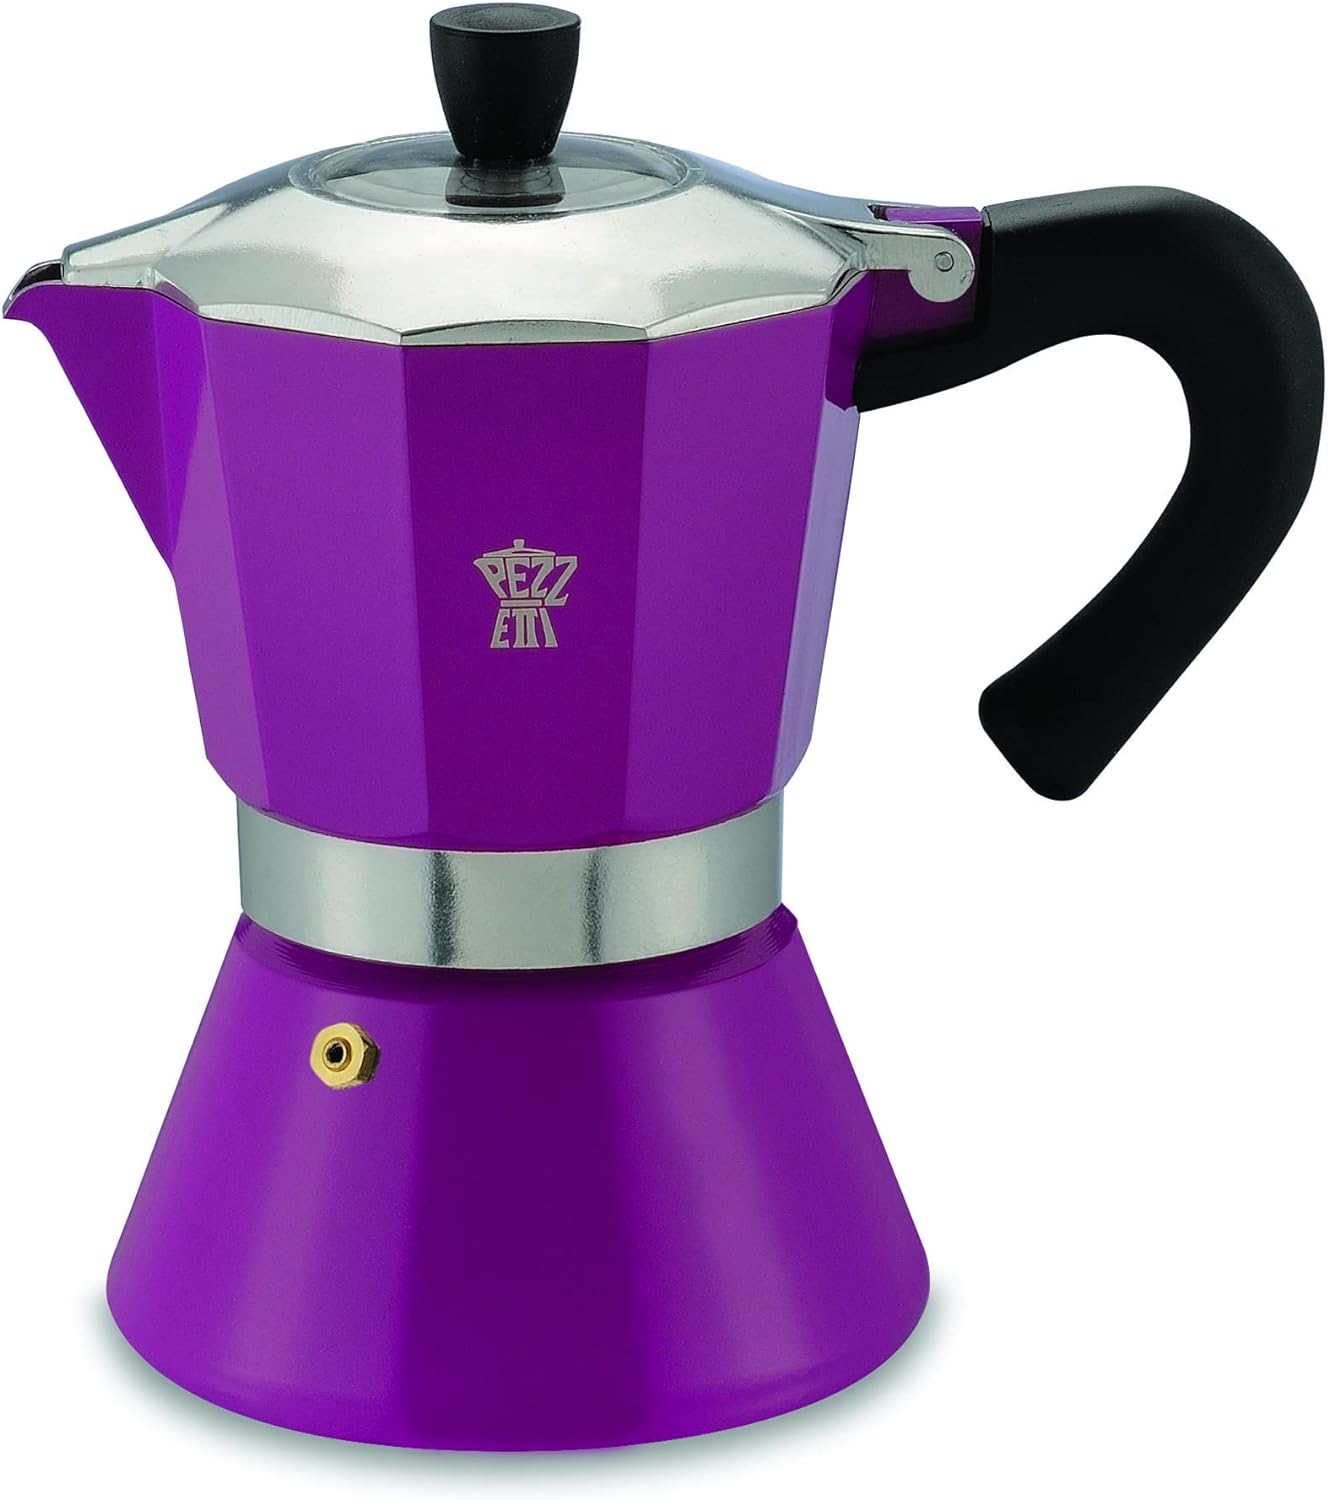 Pezzetti, Bellexpress 6 Cup Espresso Maker Made of Food Grade Aluminum, Transparent Lid, Silicone Gasket, Heat Resistant Handle, Induction Surfaces, Purple